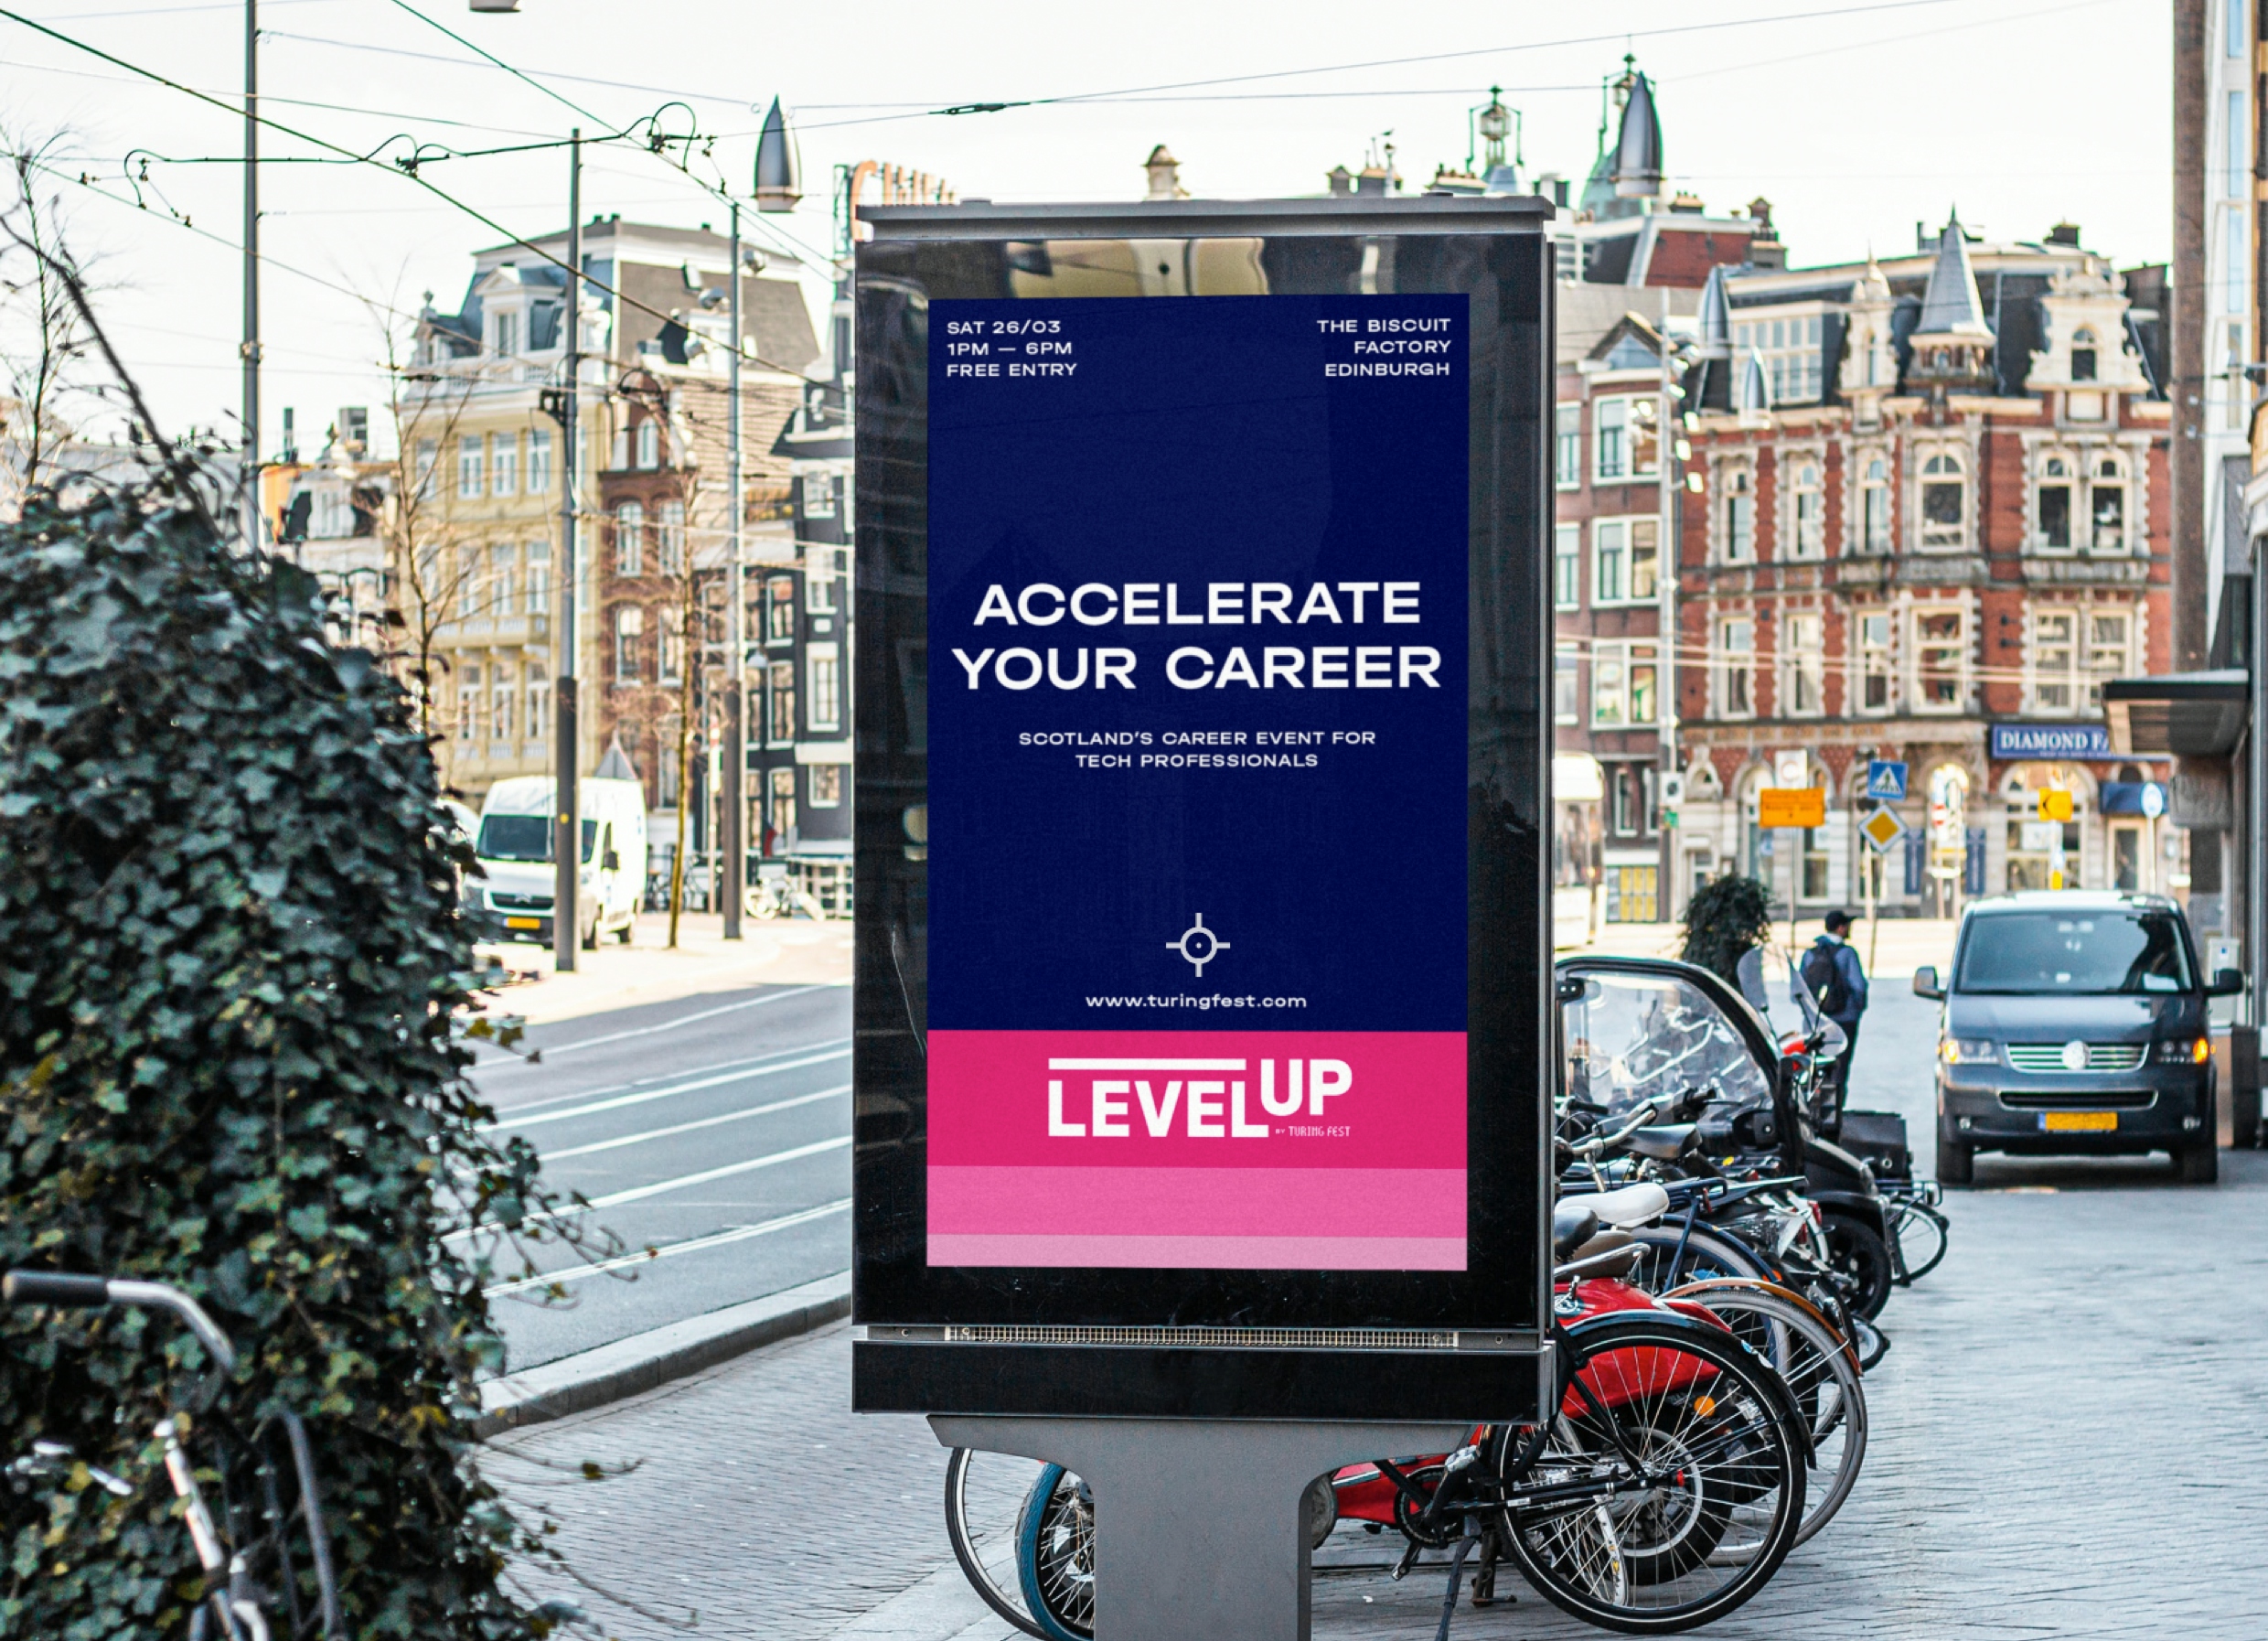 A digital street poster with an advert for the event. Text includes “Accelerate Your Career”, “Scotland’s Career Event For Tech Professionals”, “LEVEL UP”, and event details.